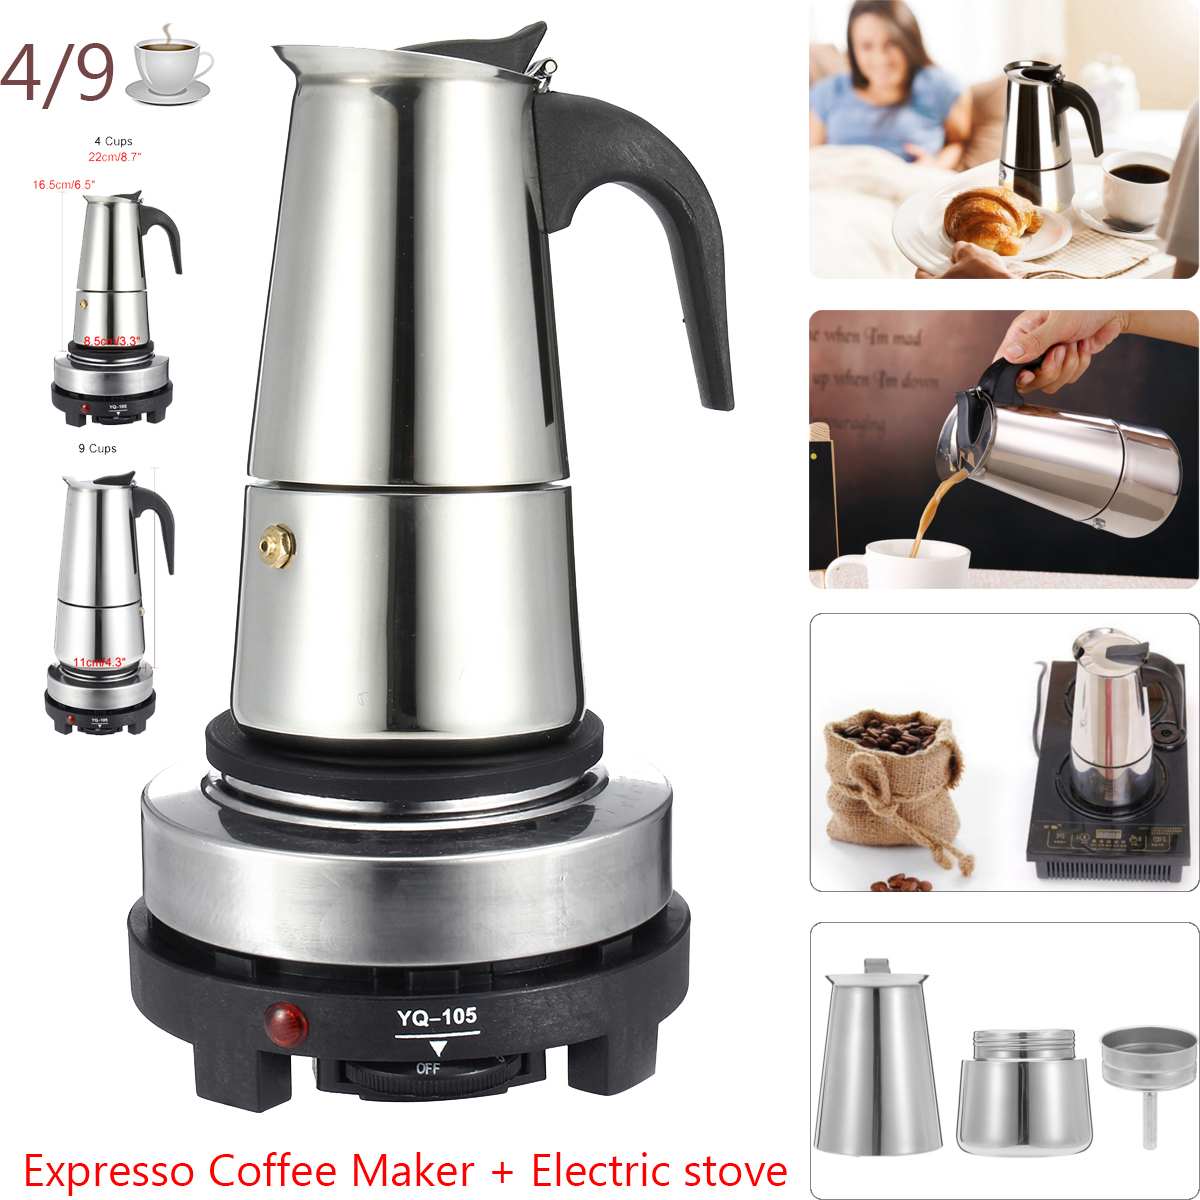 200ML Portable Espresso Coffee Maker Moka Pot Stainless Steel with Electric Cooker Filter Percolator Coffee Brewer Kettle